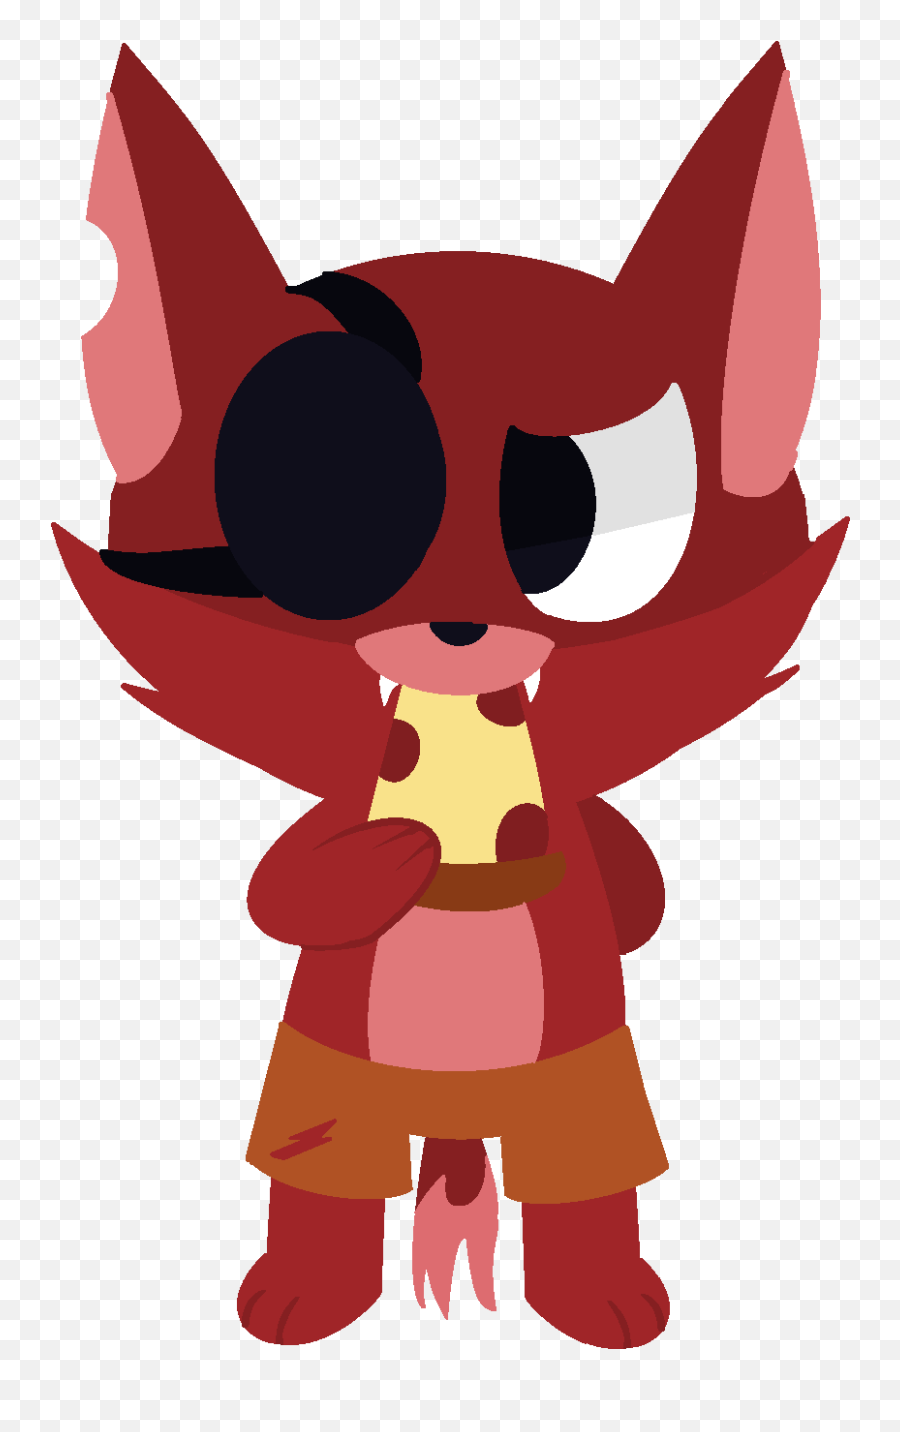 Cliparts For Commercial Use - Cute Foxy Eating Pizza Fnaf On Scratch Studio Emoji,Commercial Use Clipart